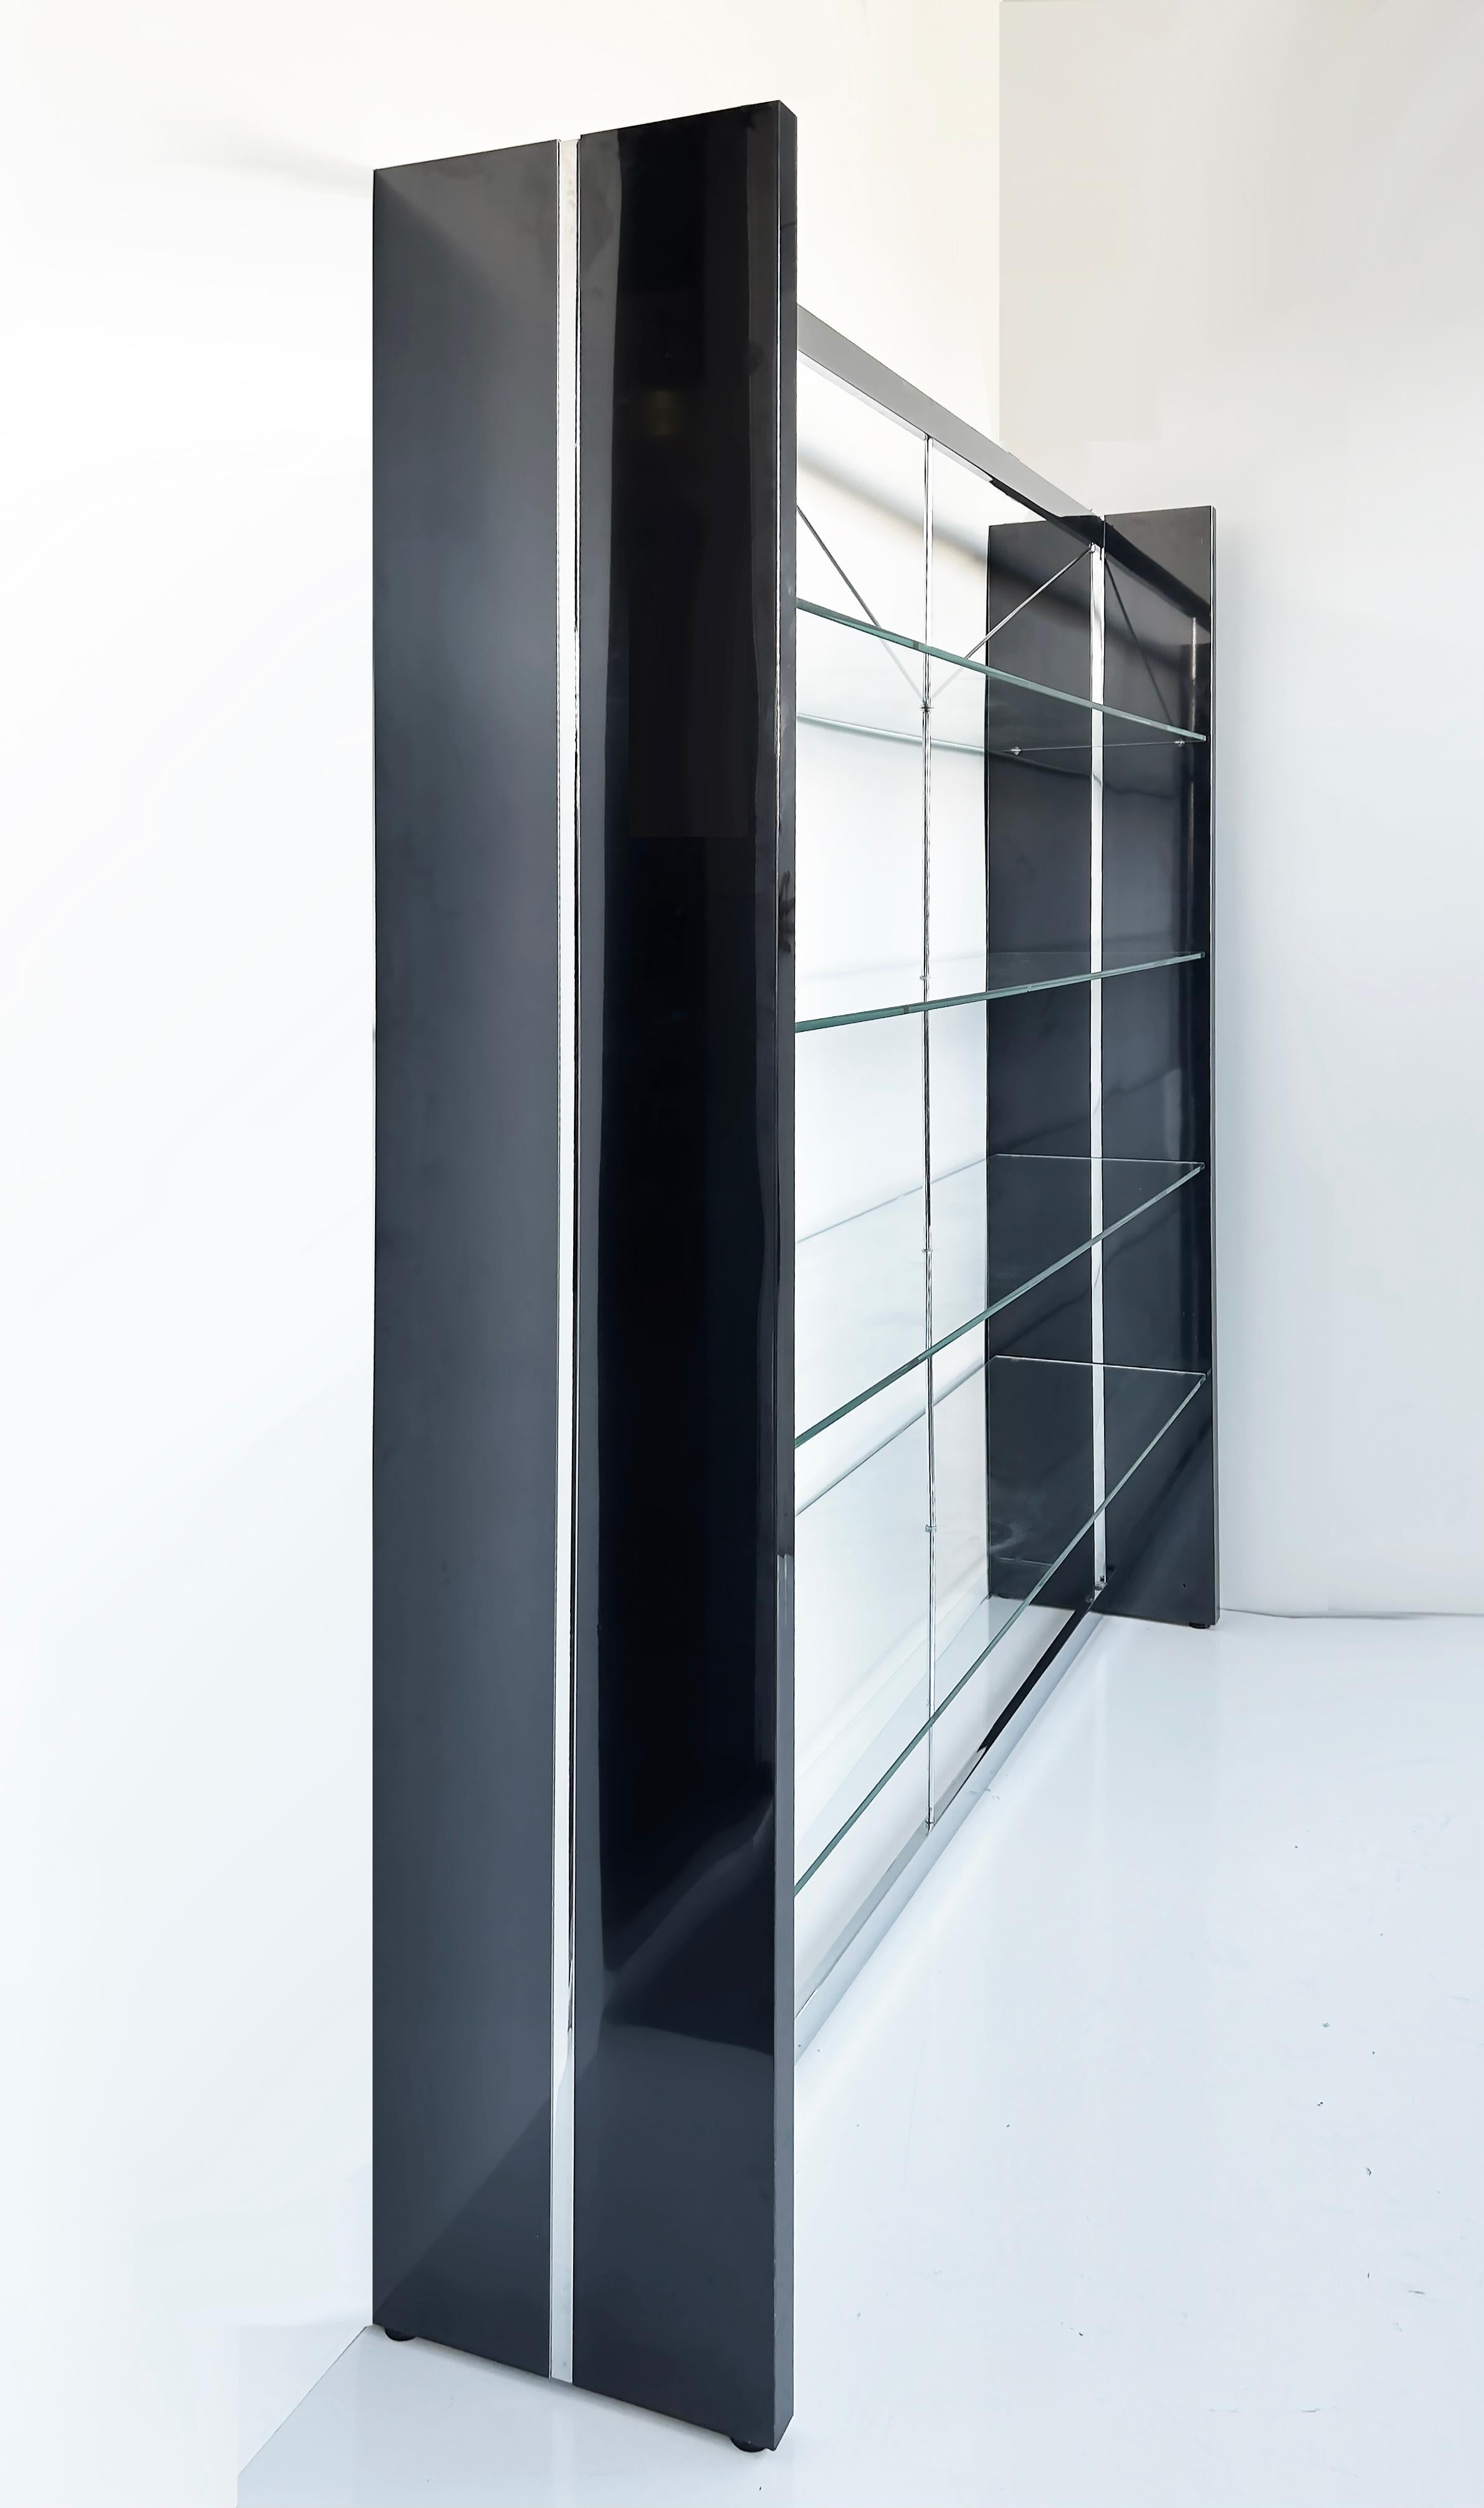 Gun Metal, Stainless, Glass Etagere Shelves or Room Divider

Offered for sale is a fine-quality gun metal, stainless steel, and glass etagere shelving unit that can be used as a room divider. The crisscross supports intersect through the glass shelf